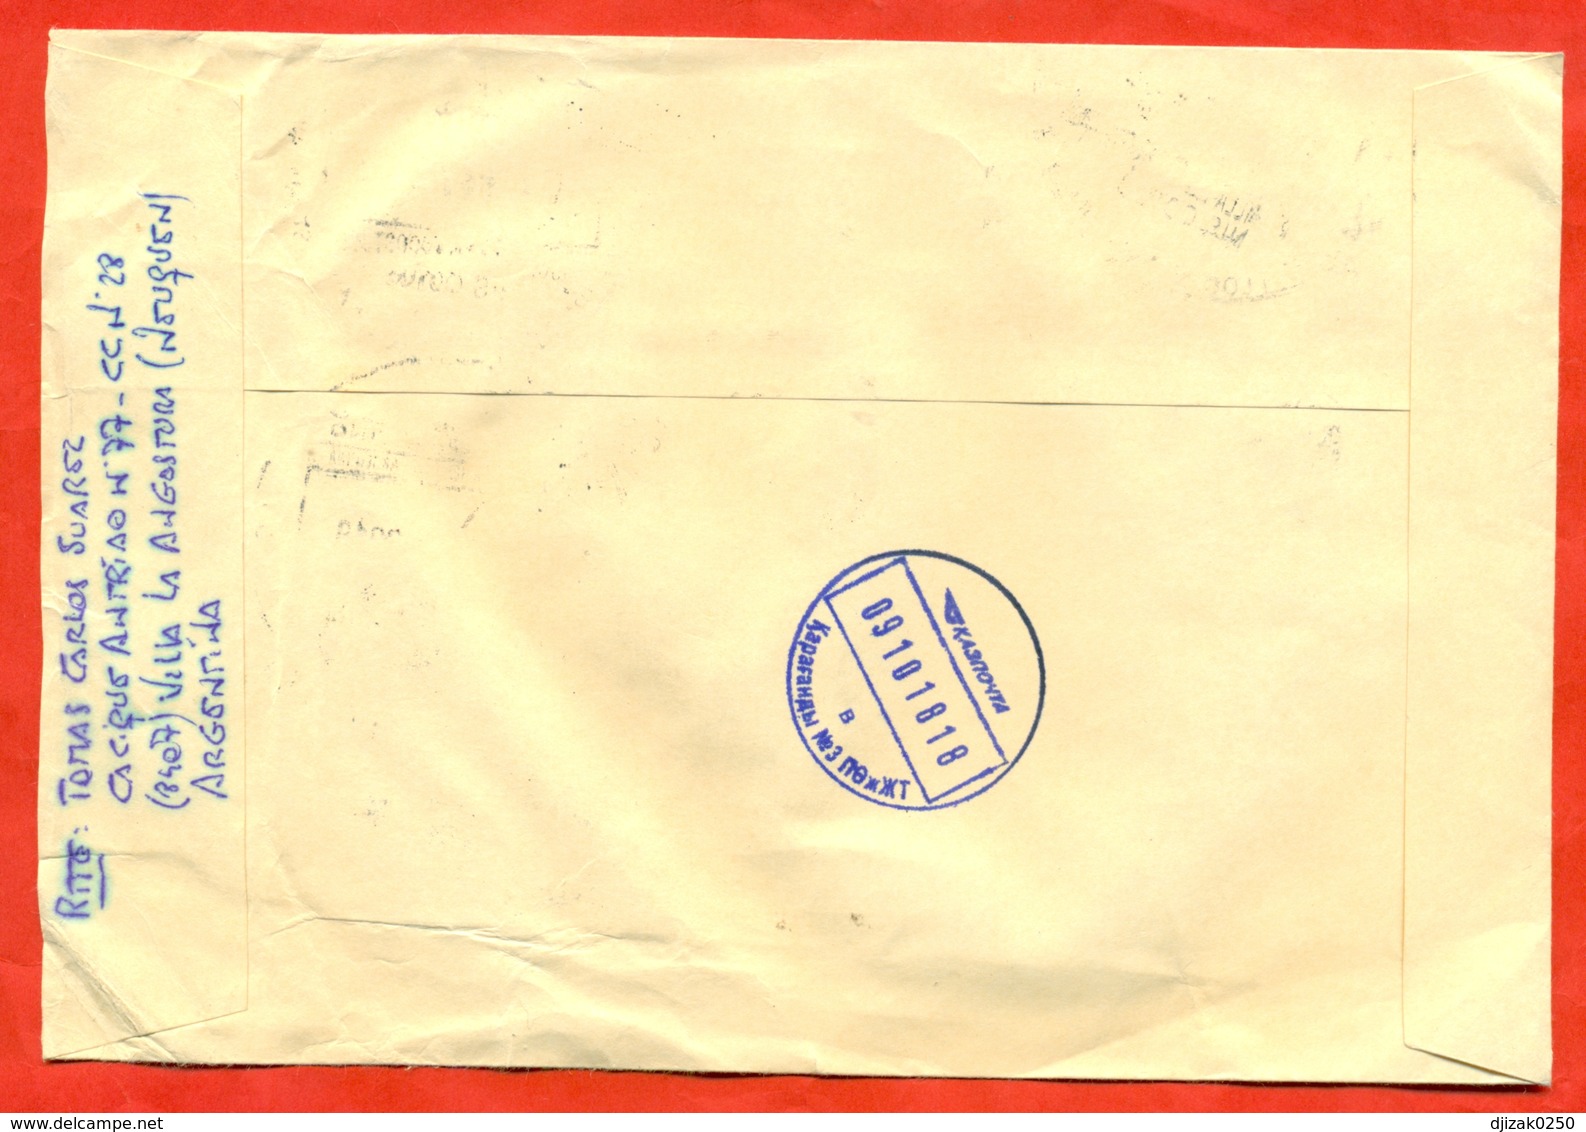 Argentina 2018.Aircrafts.Bird. Ship.Fruits.The Envelope Is Really Past Mail. - Covers & Documents